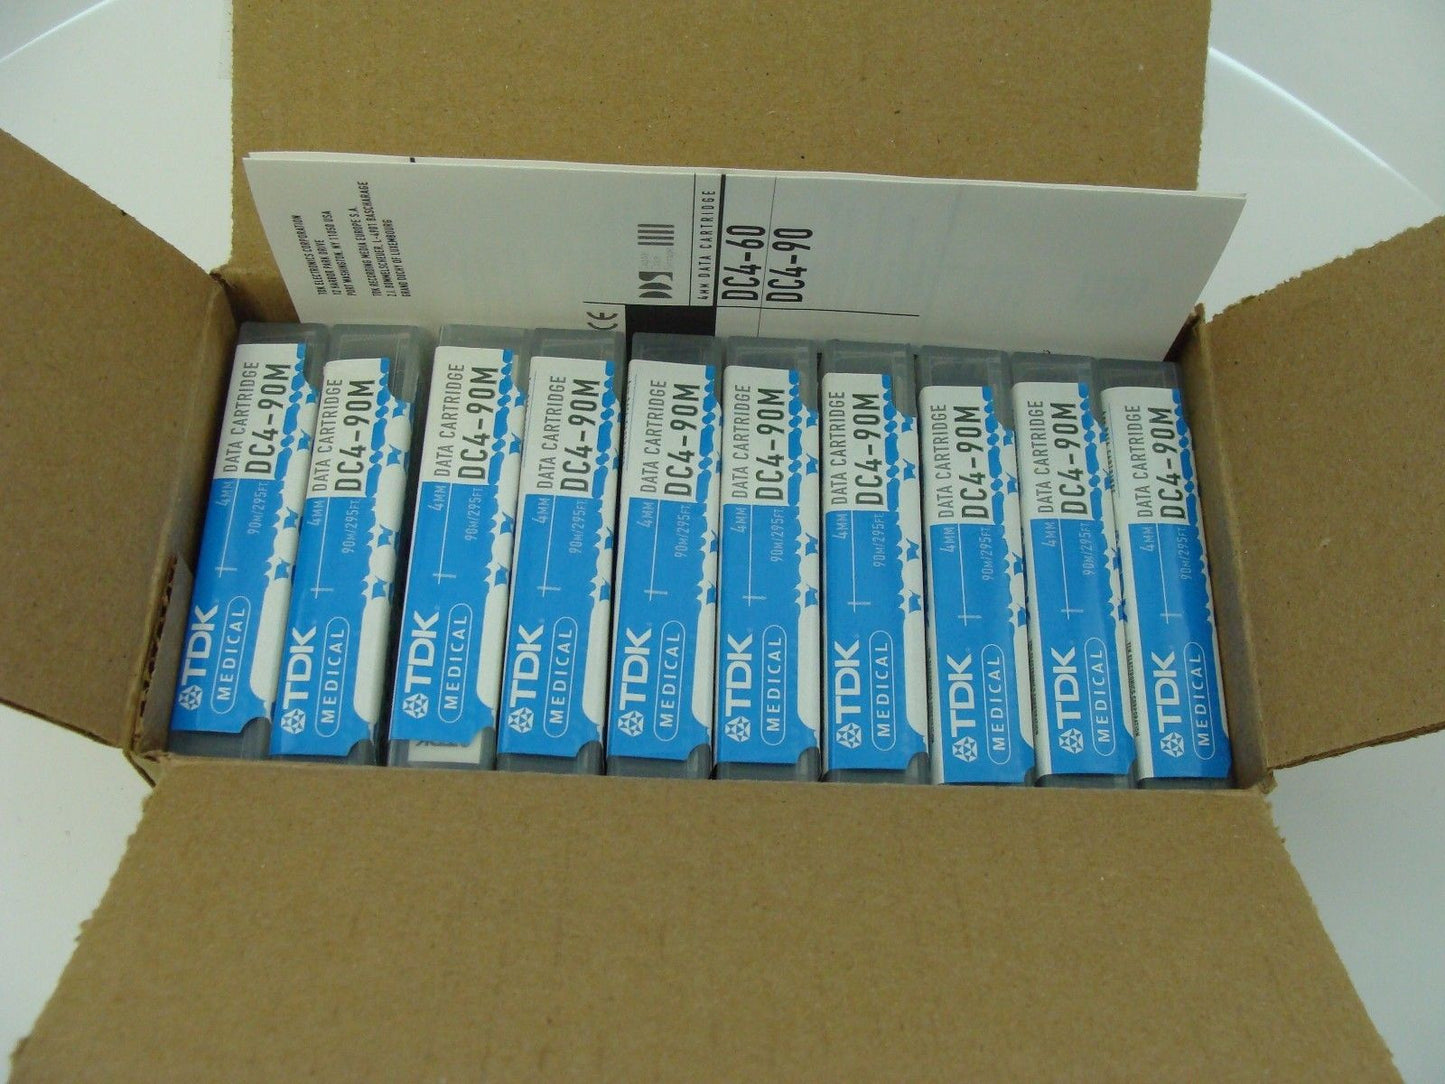 Box of 10 TDK DC4-90m 90 Meter DDS1 4mm Tape Cartridge - New - Micro Technologies (yourdrives.com)